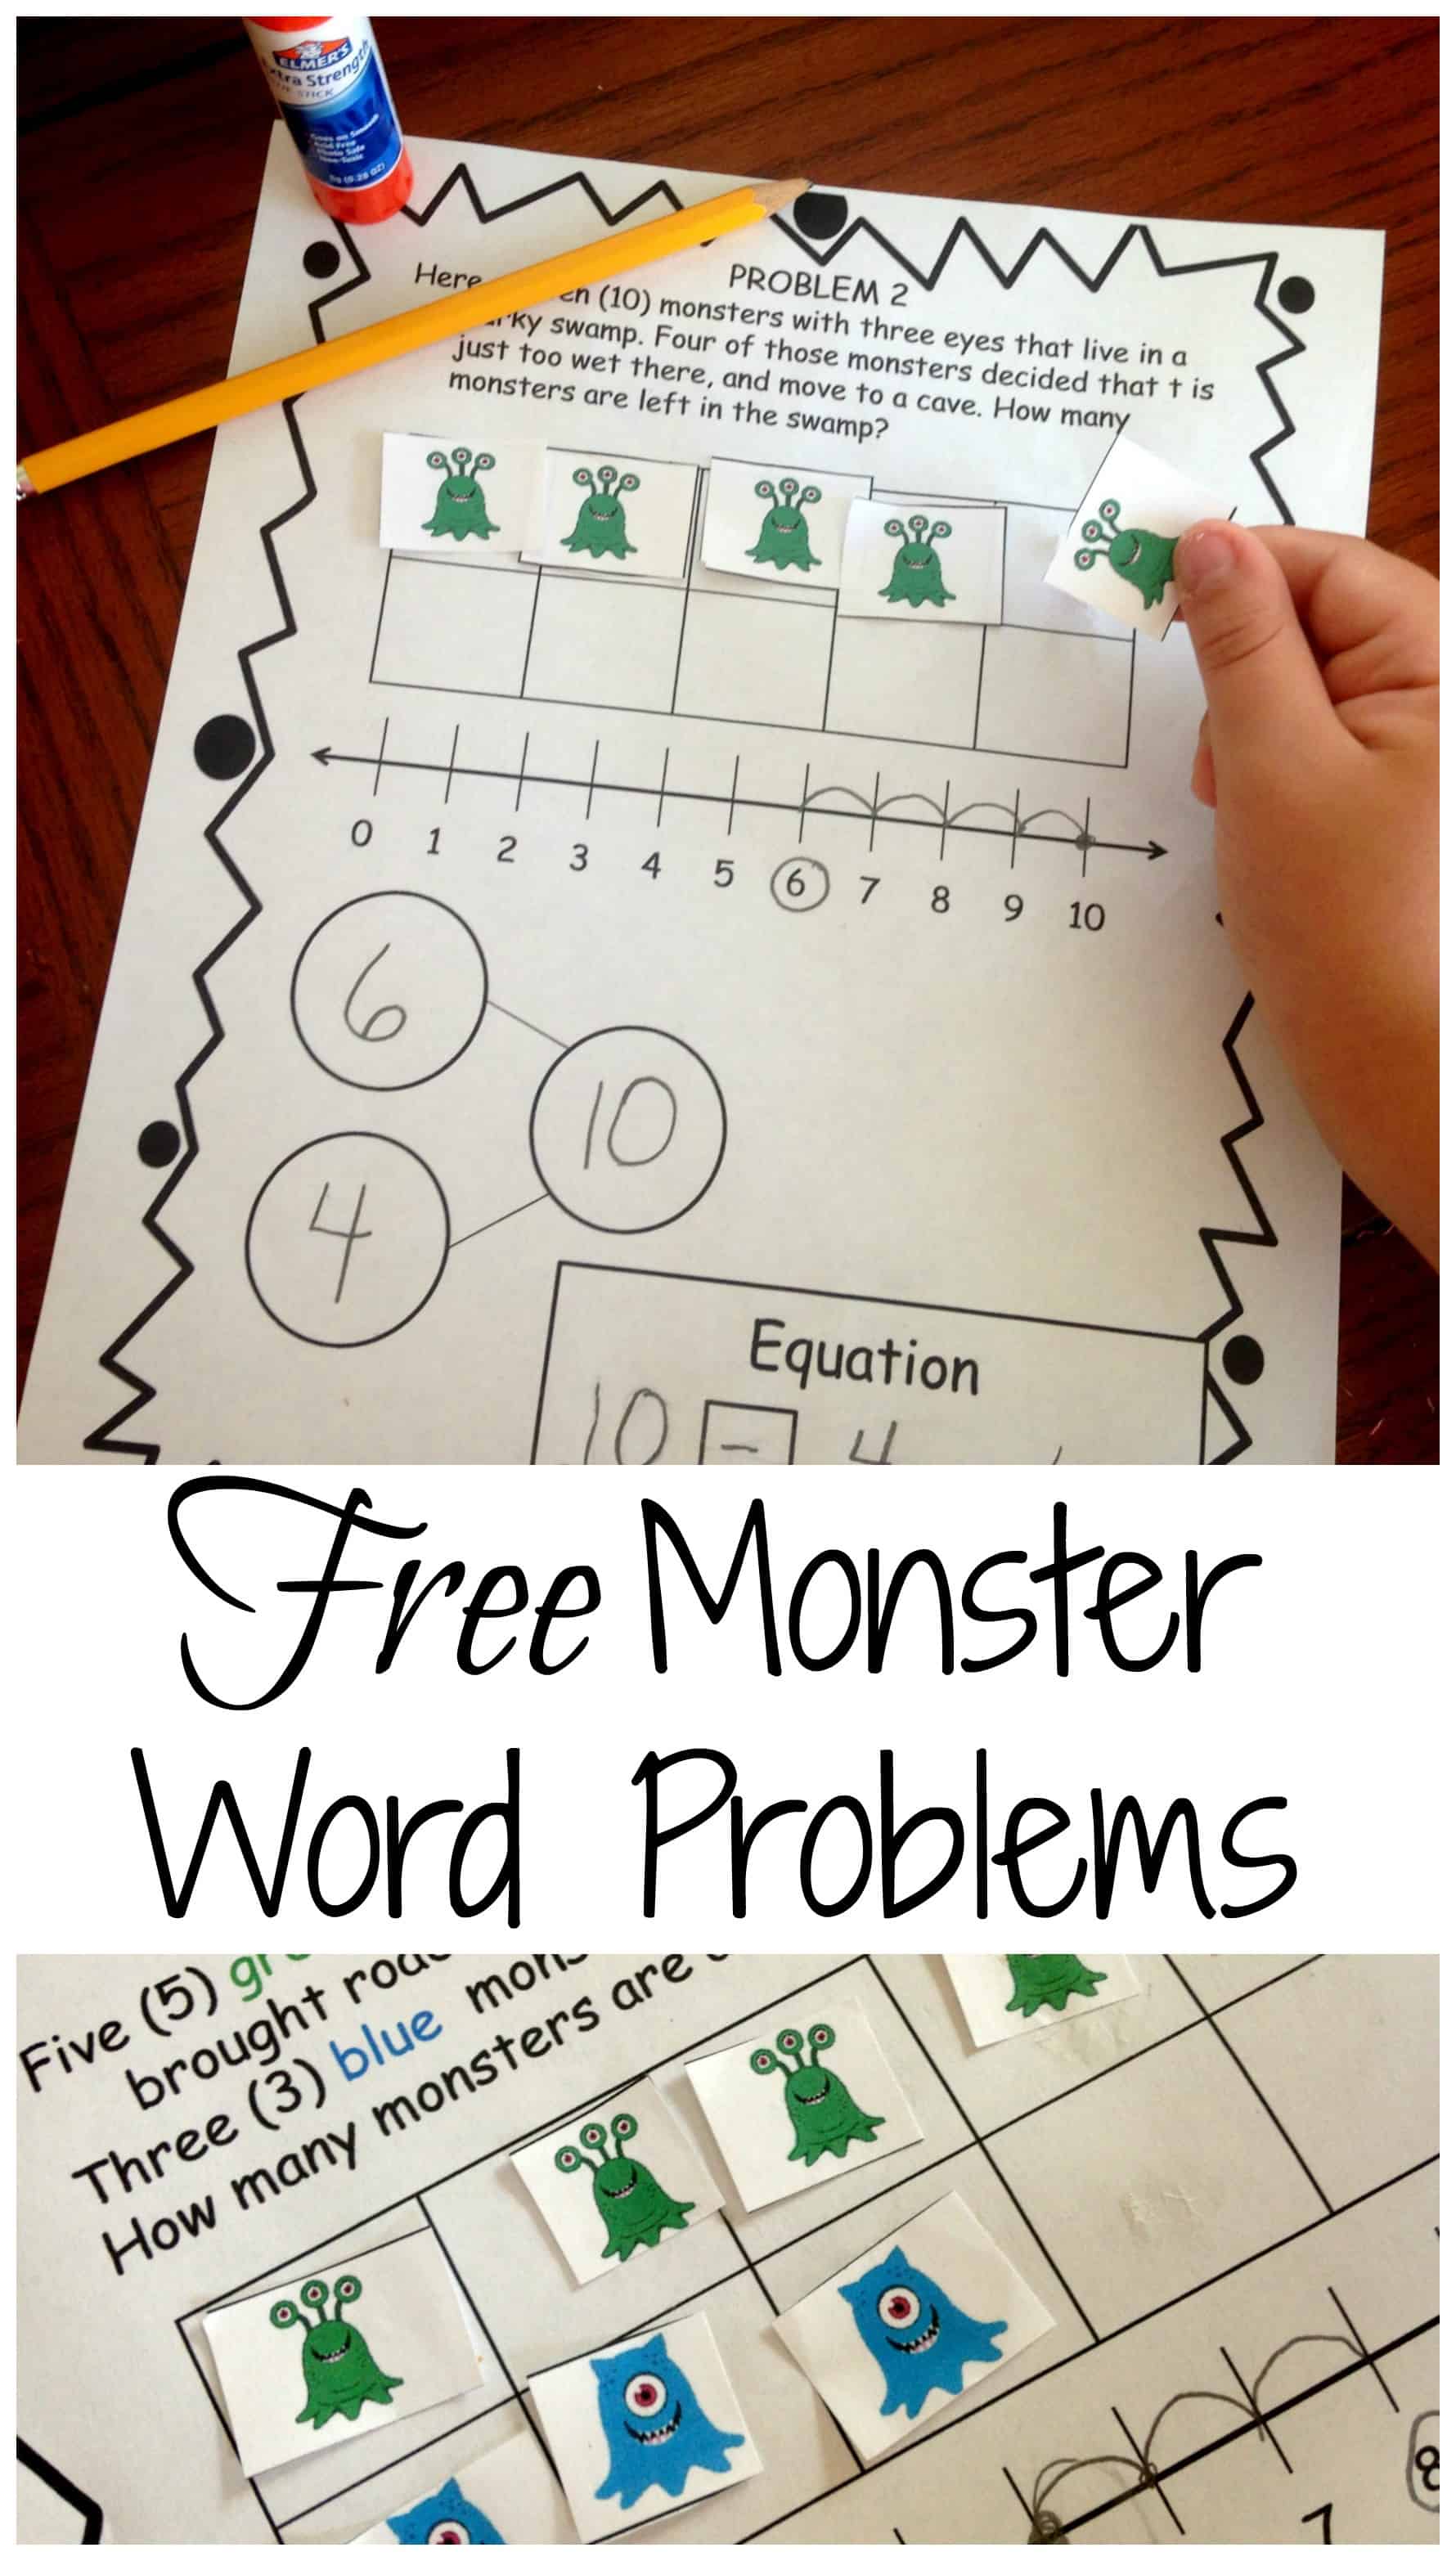 Monster word problems in 10 worksheets with monster pictures glued to the worksheet and a pencil. 